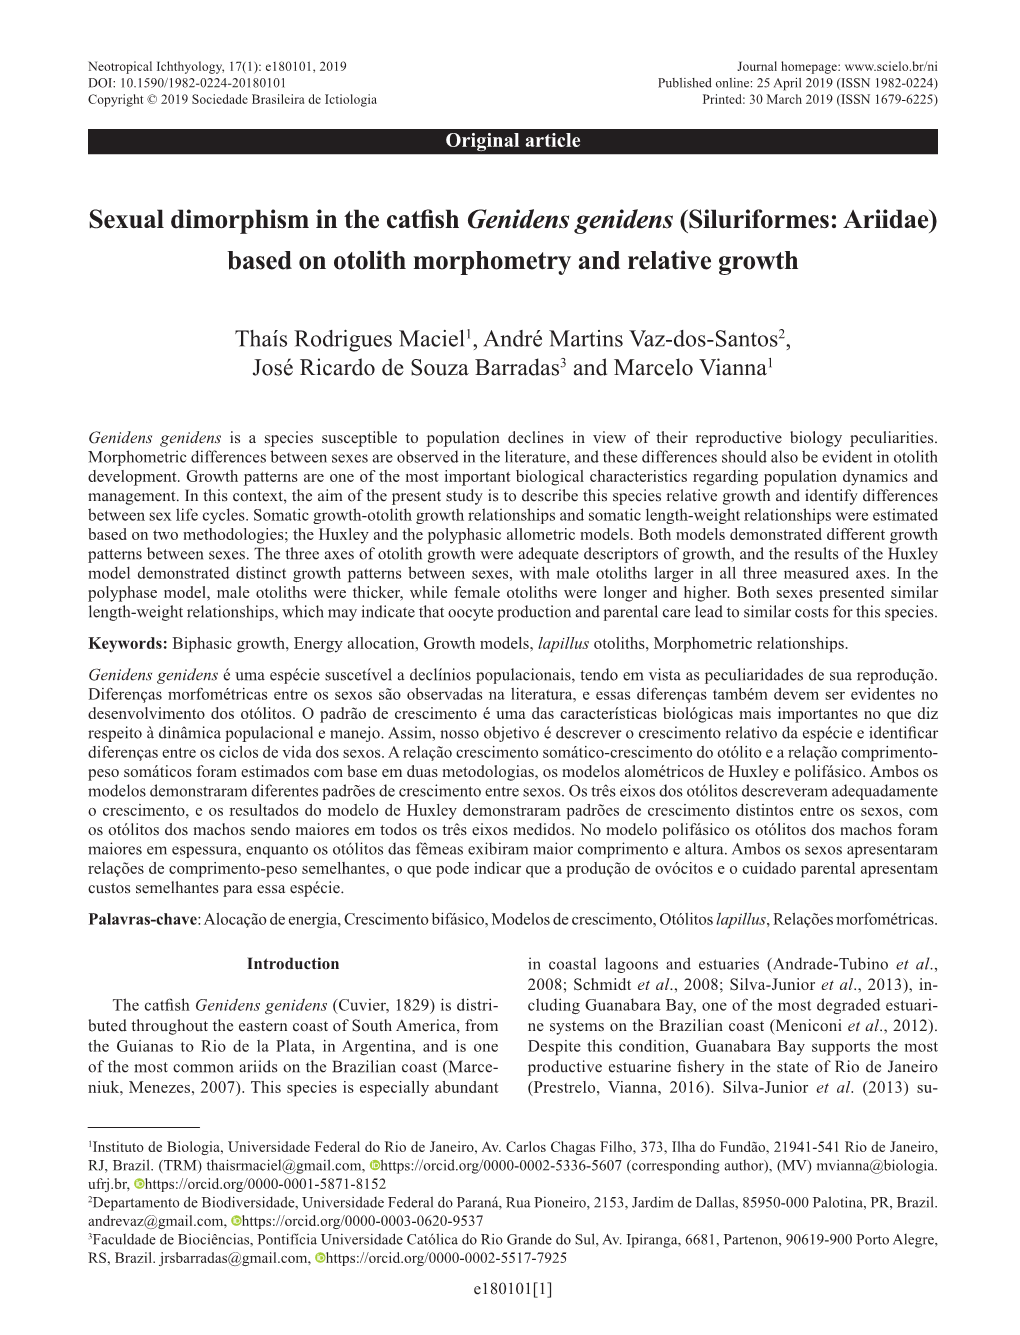 Sexual Dimorphism in the Catfish Genidens Genidens (Siluriformes: Ariidae) Based on Otolith Morphometry and Relative Growth